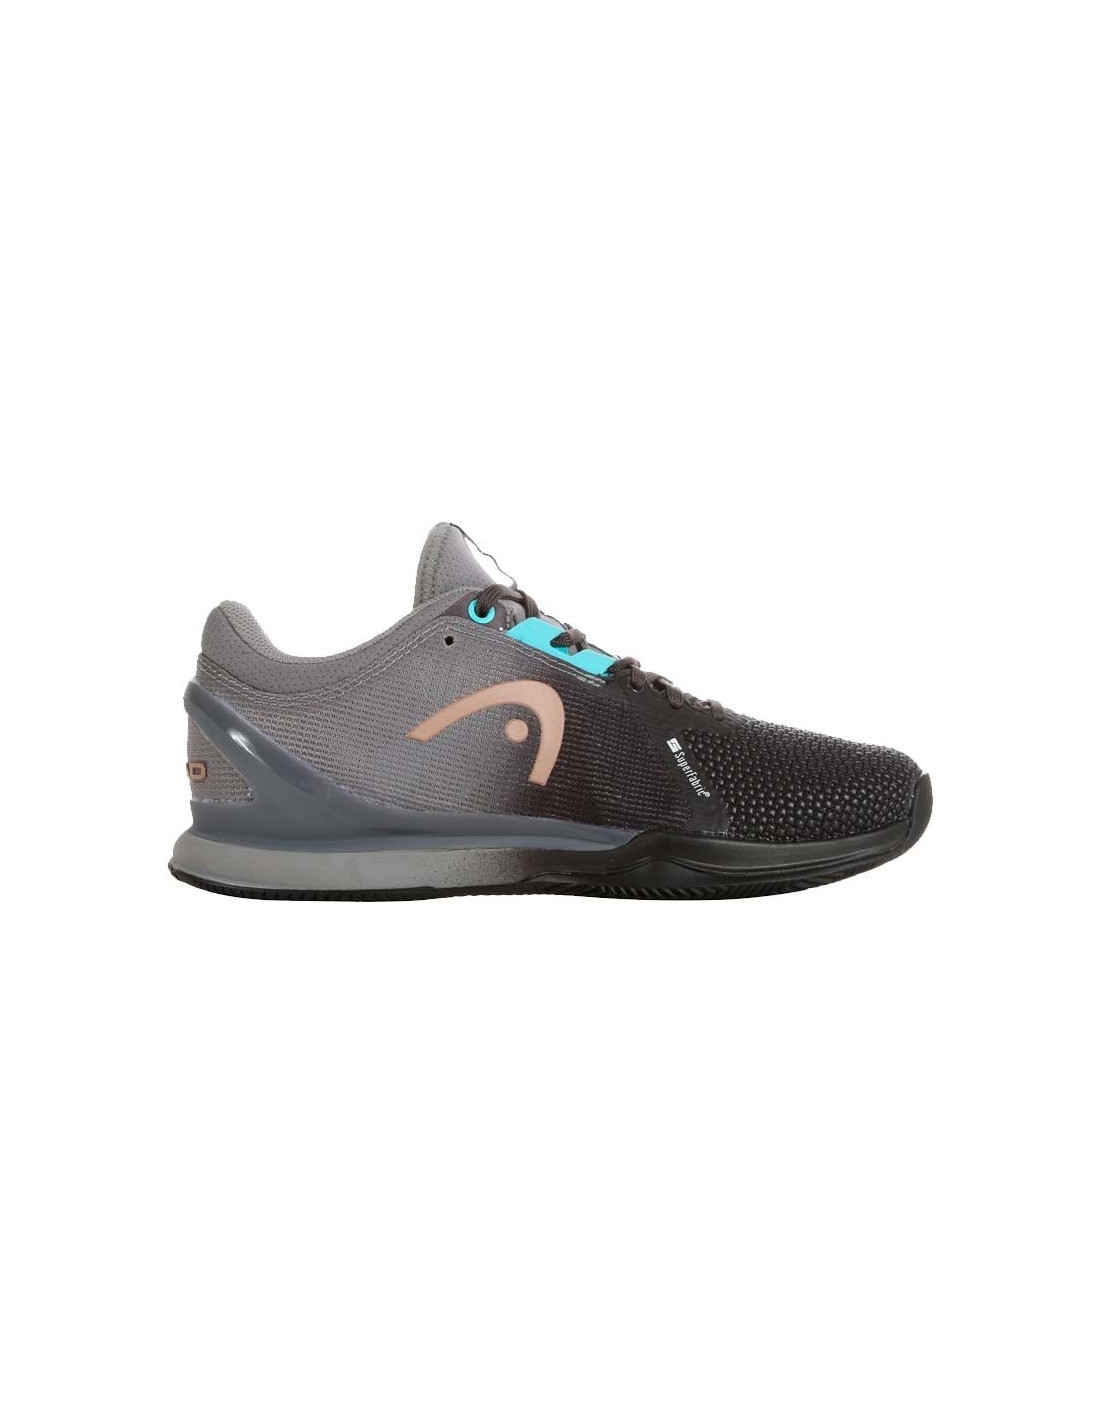 Euro show original title Details about   Head Sprint SF Clay Women Tennis Shoes Black/Red/Teal RRP 180 